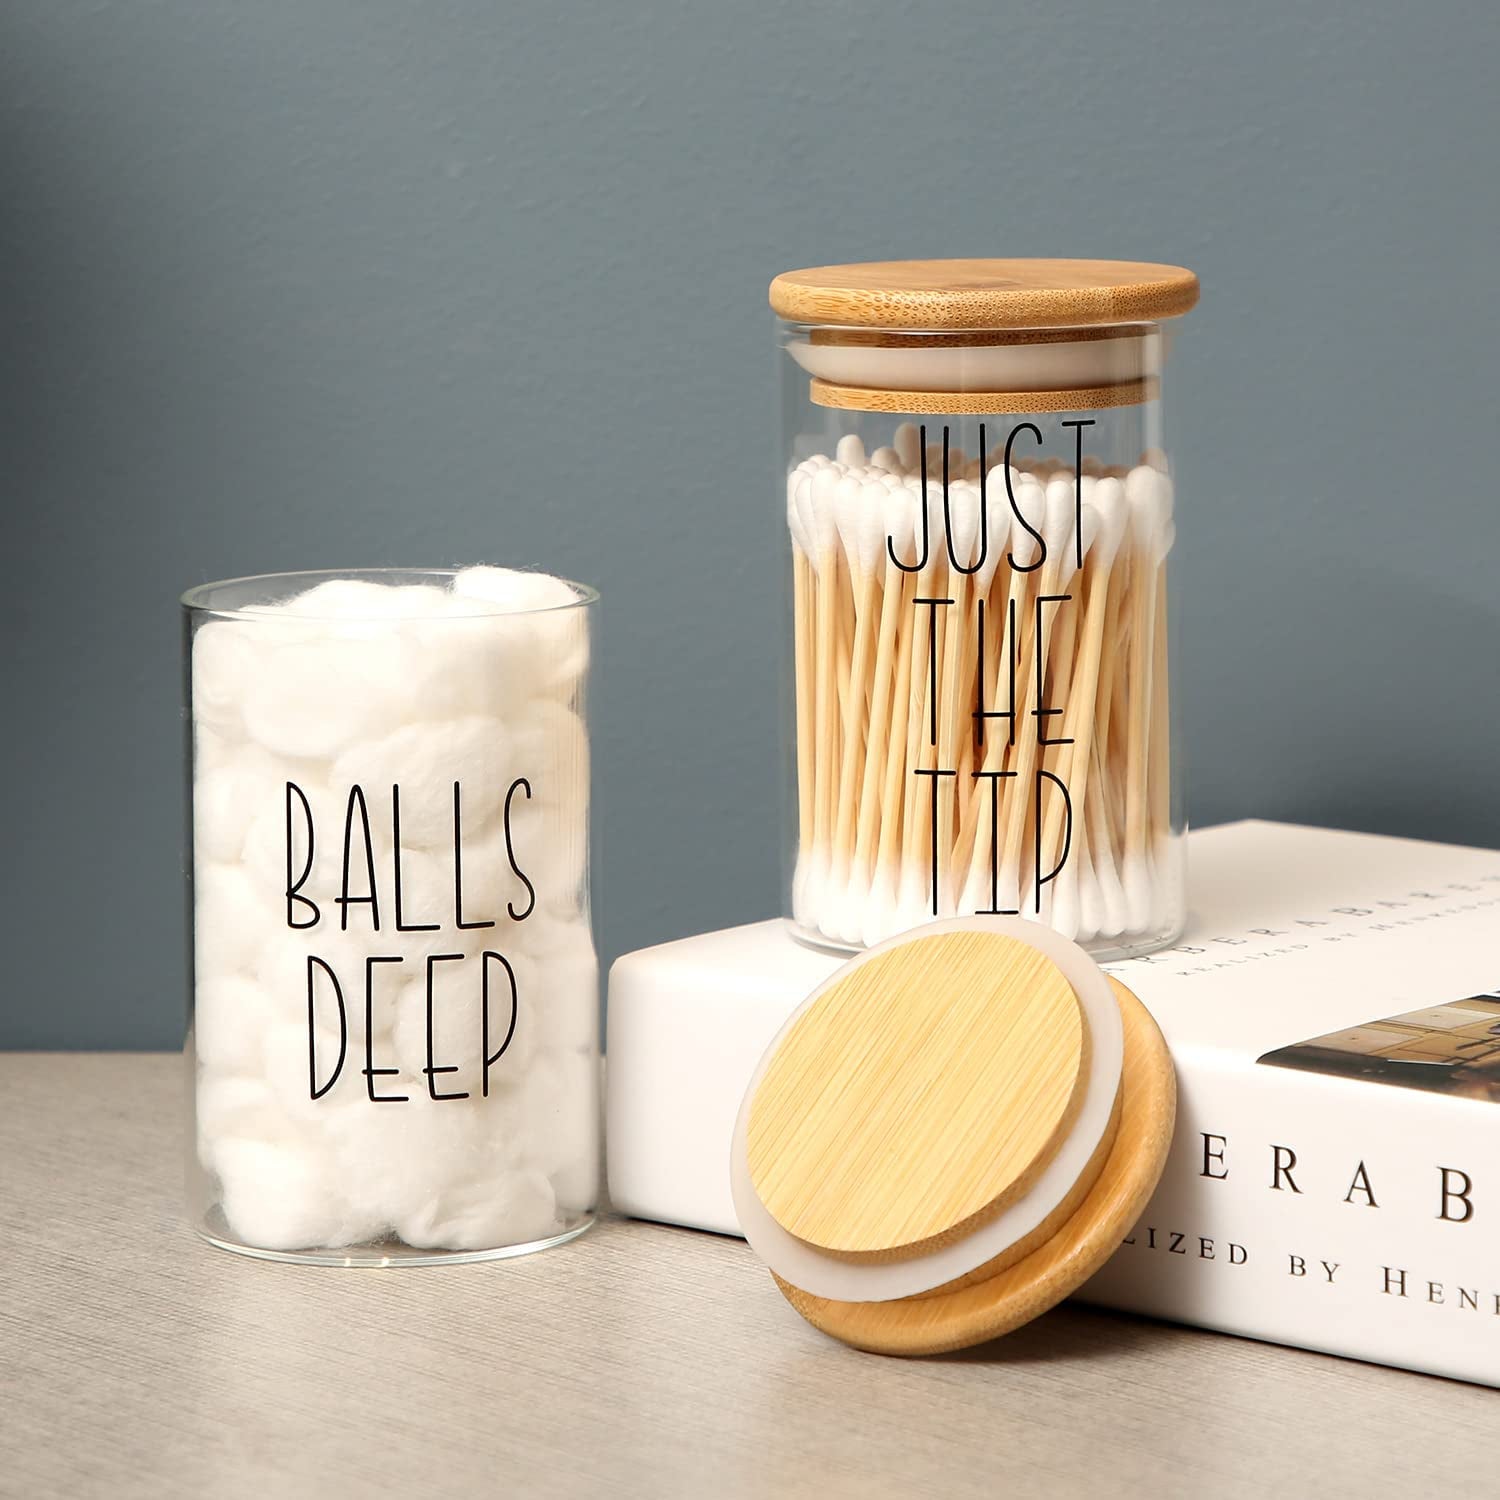 Apothecary Jars with Lids Glass, Cotton Ball, Qtip/Bobby Pin Holder, Hair Tie Organizer Are Great for Bathroom Organization, Accessories. (Set of 4, Ties & Pins)